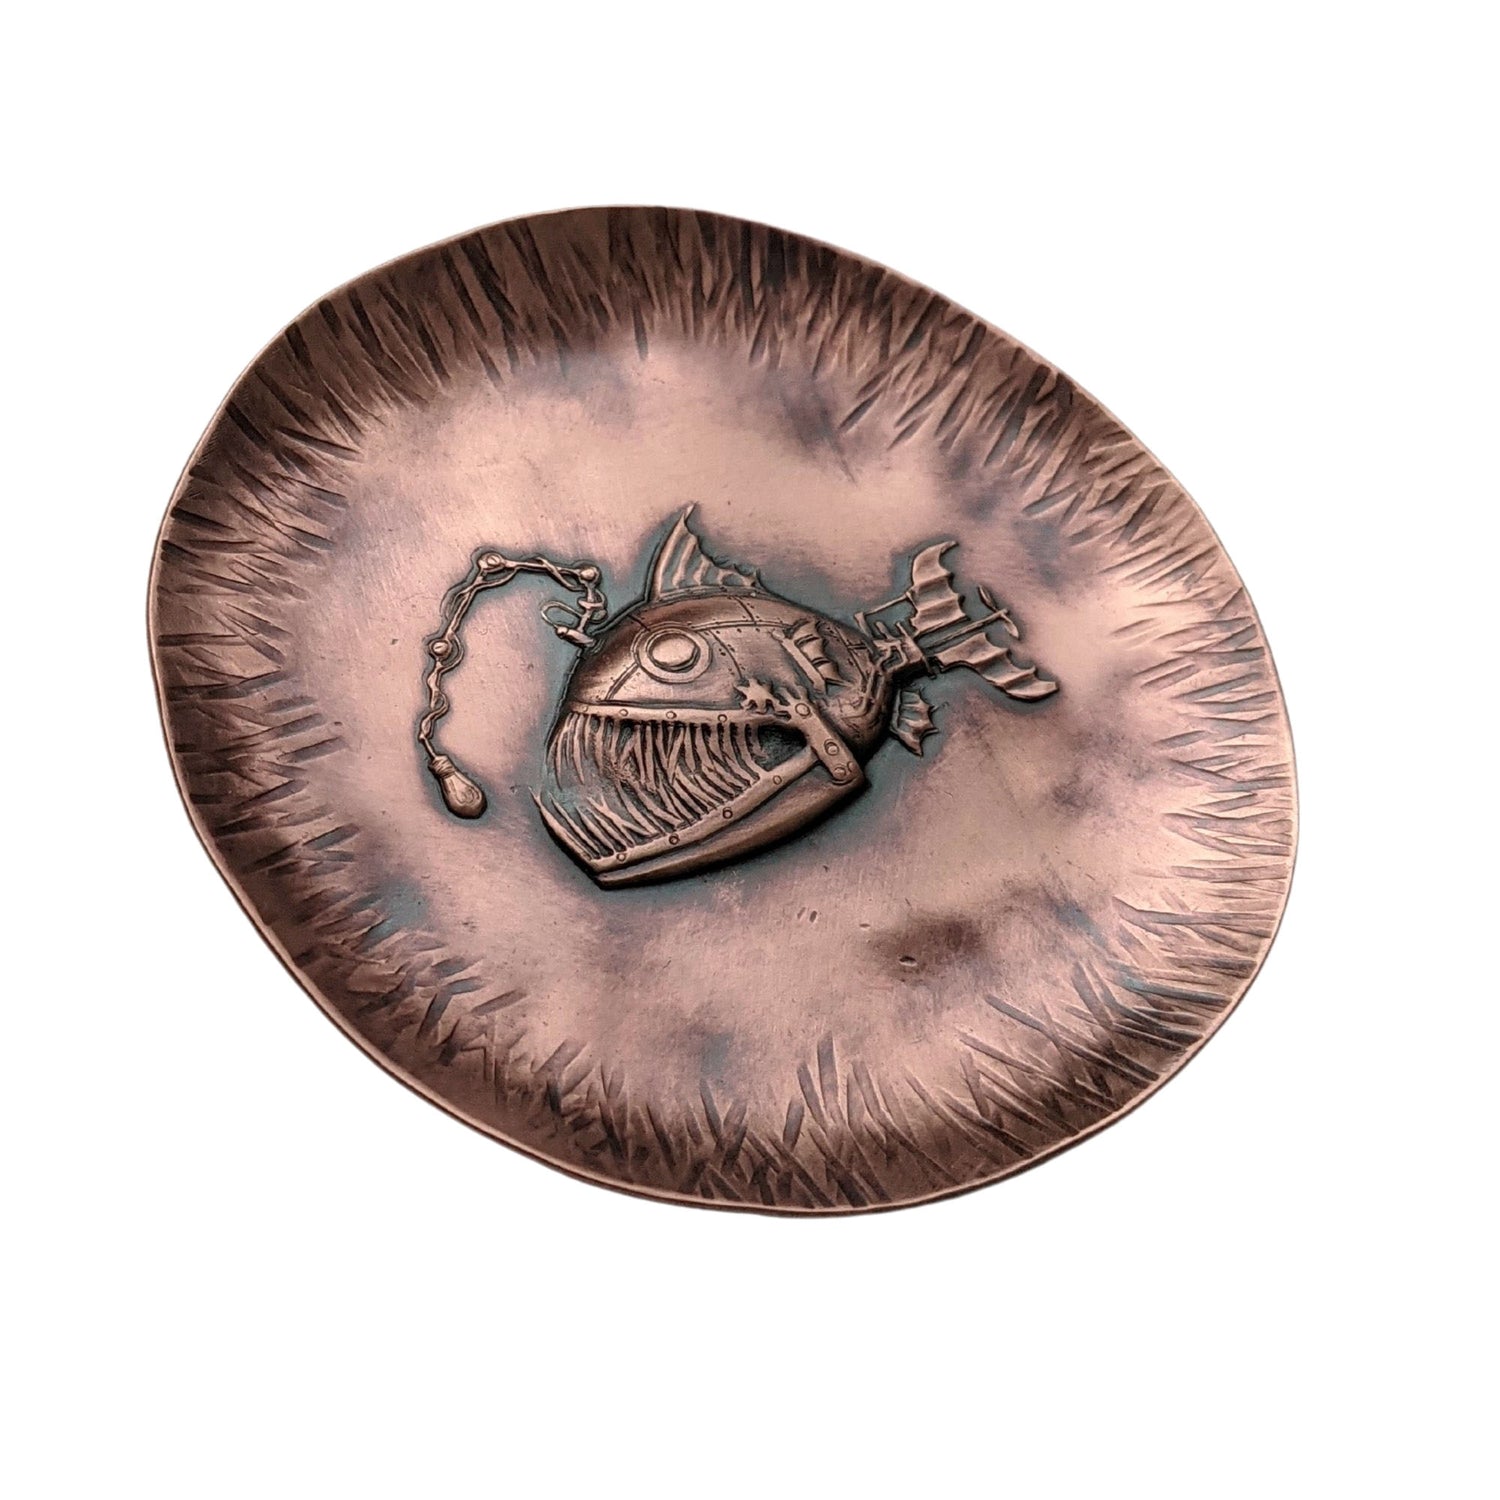 A copper dish with a raised impression of an anglerfish. This is a classic steampunk design inspired by the works of Jules Verne. The dish is used to hold rings and jewelry. The edges are slightly raised to create a bowl shape and have hammered lines design around the edges. The piece is oxidized to enhance the details.